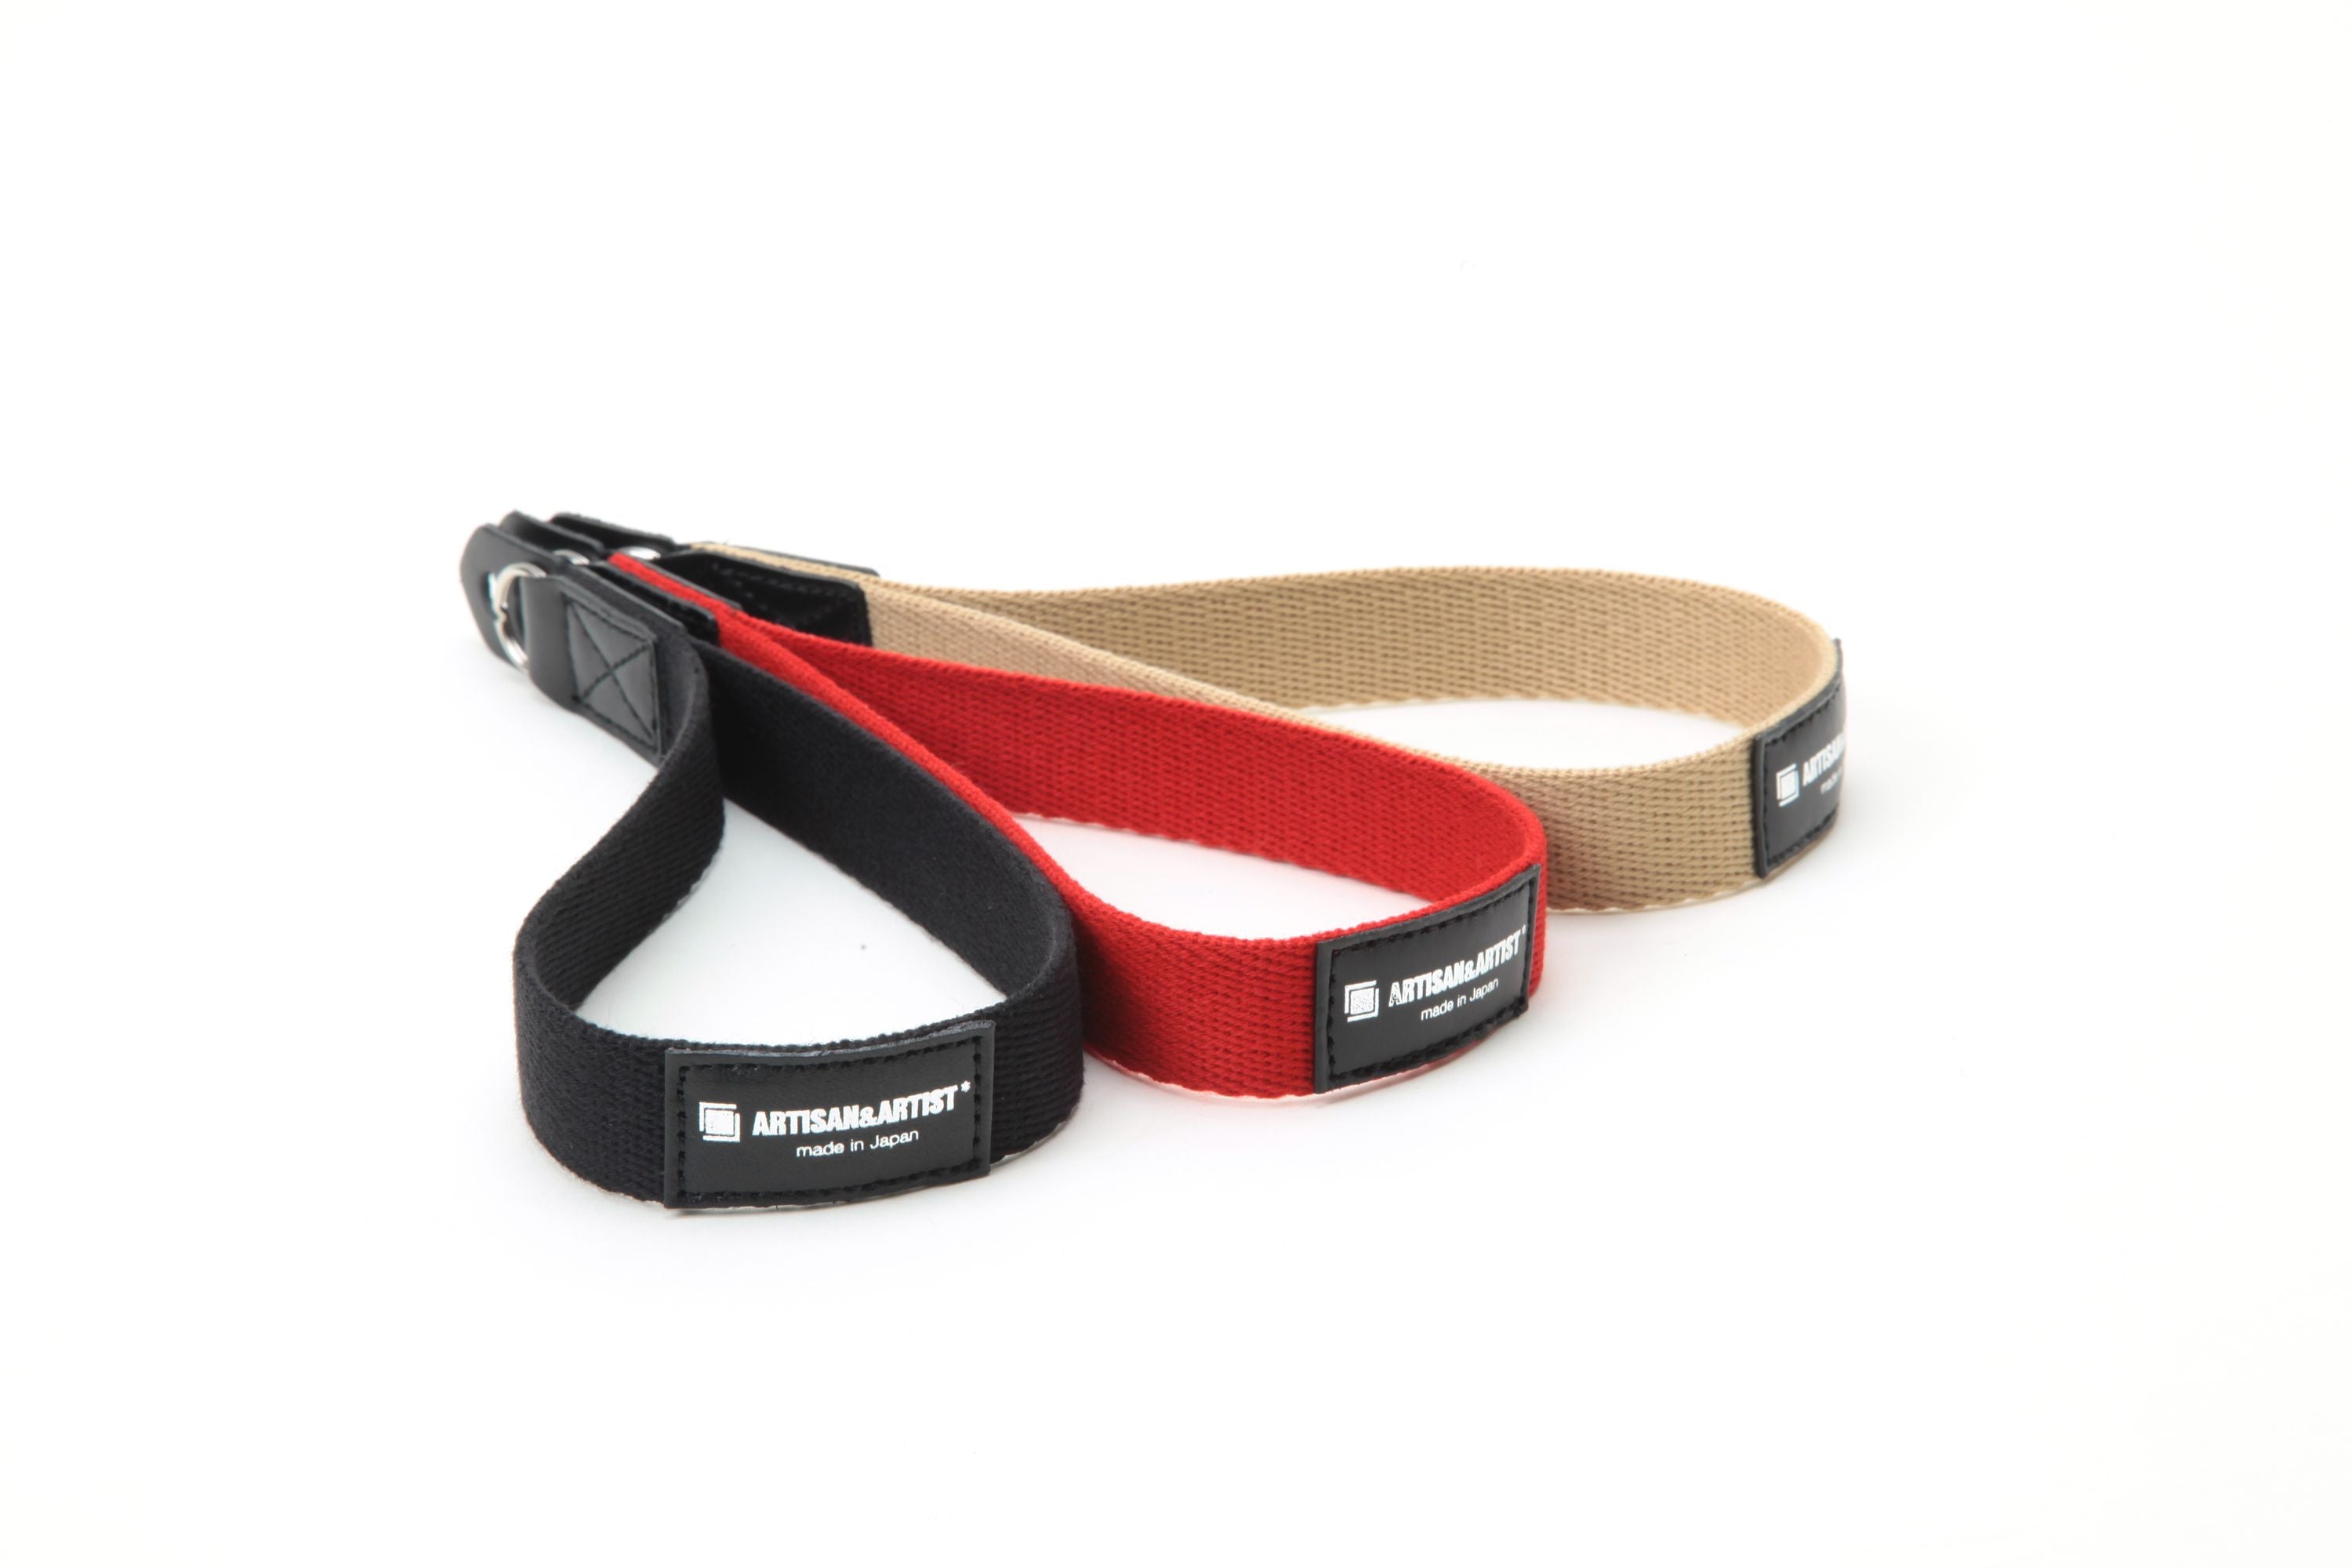 ACAM-295 Wrist Strap With Ring Type Attachment